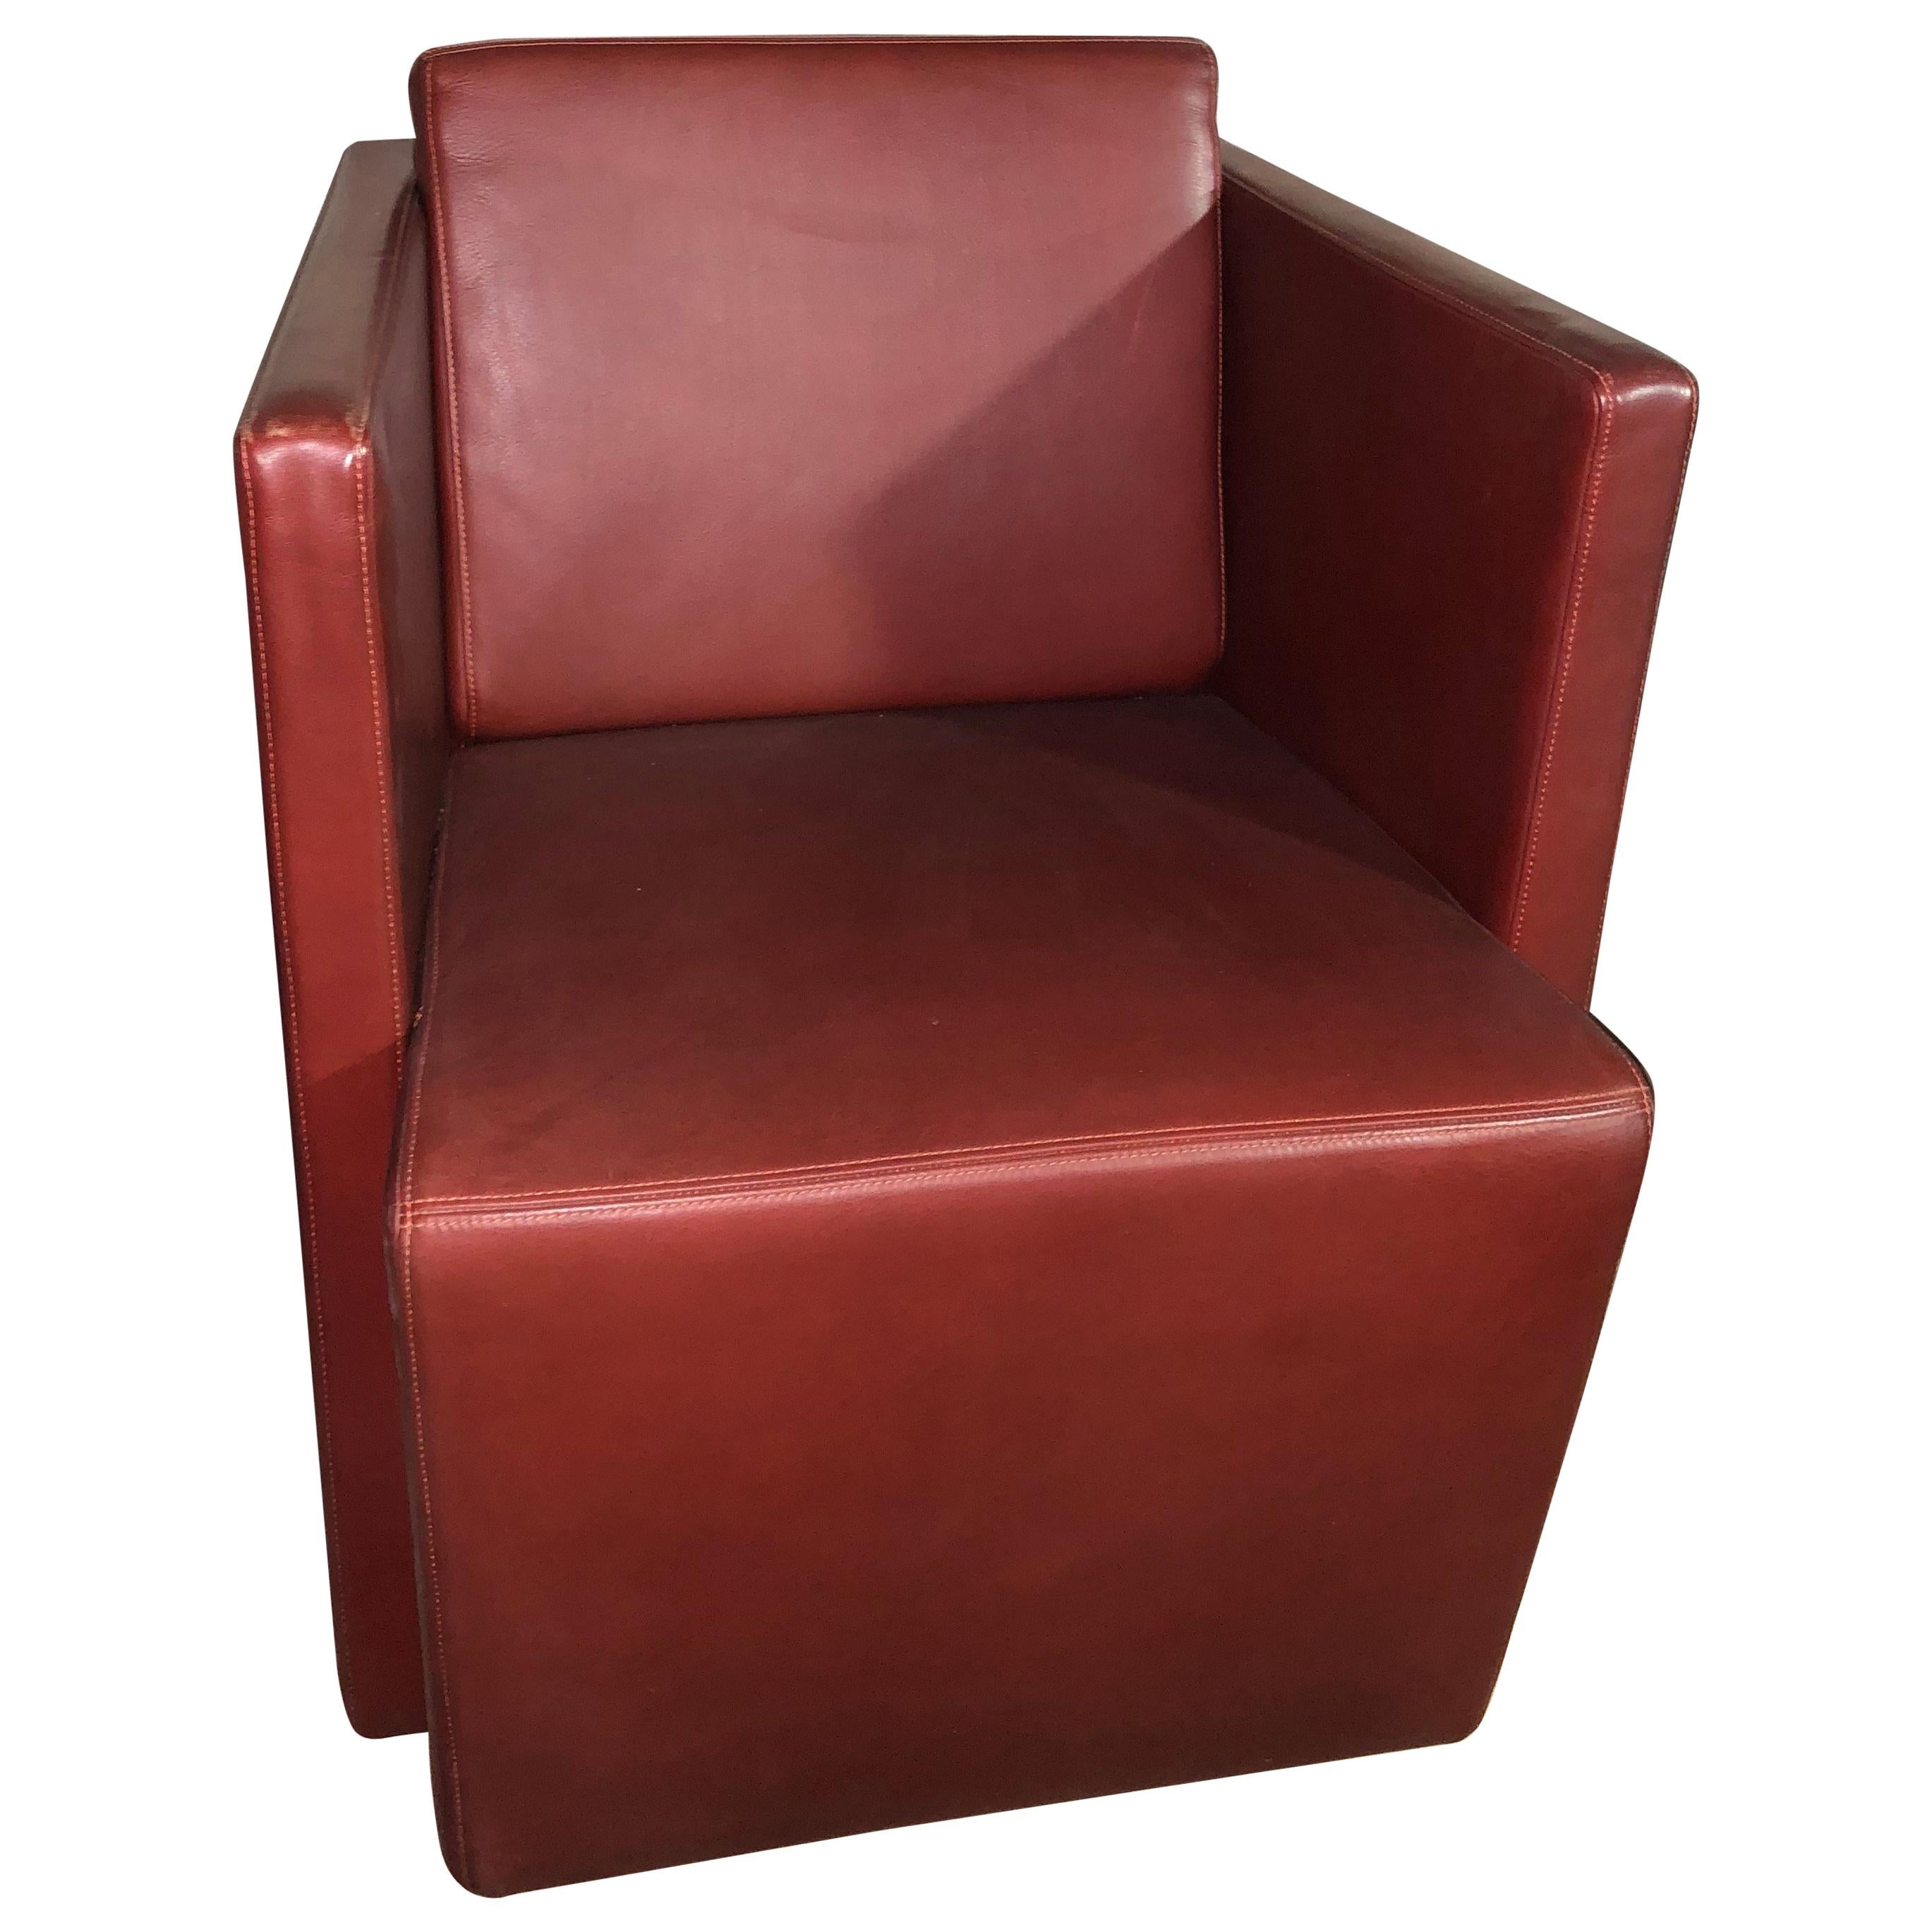 Walter Knoll Red Leather Elton Club Chair